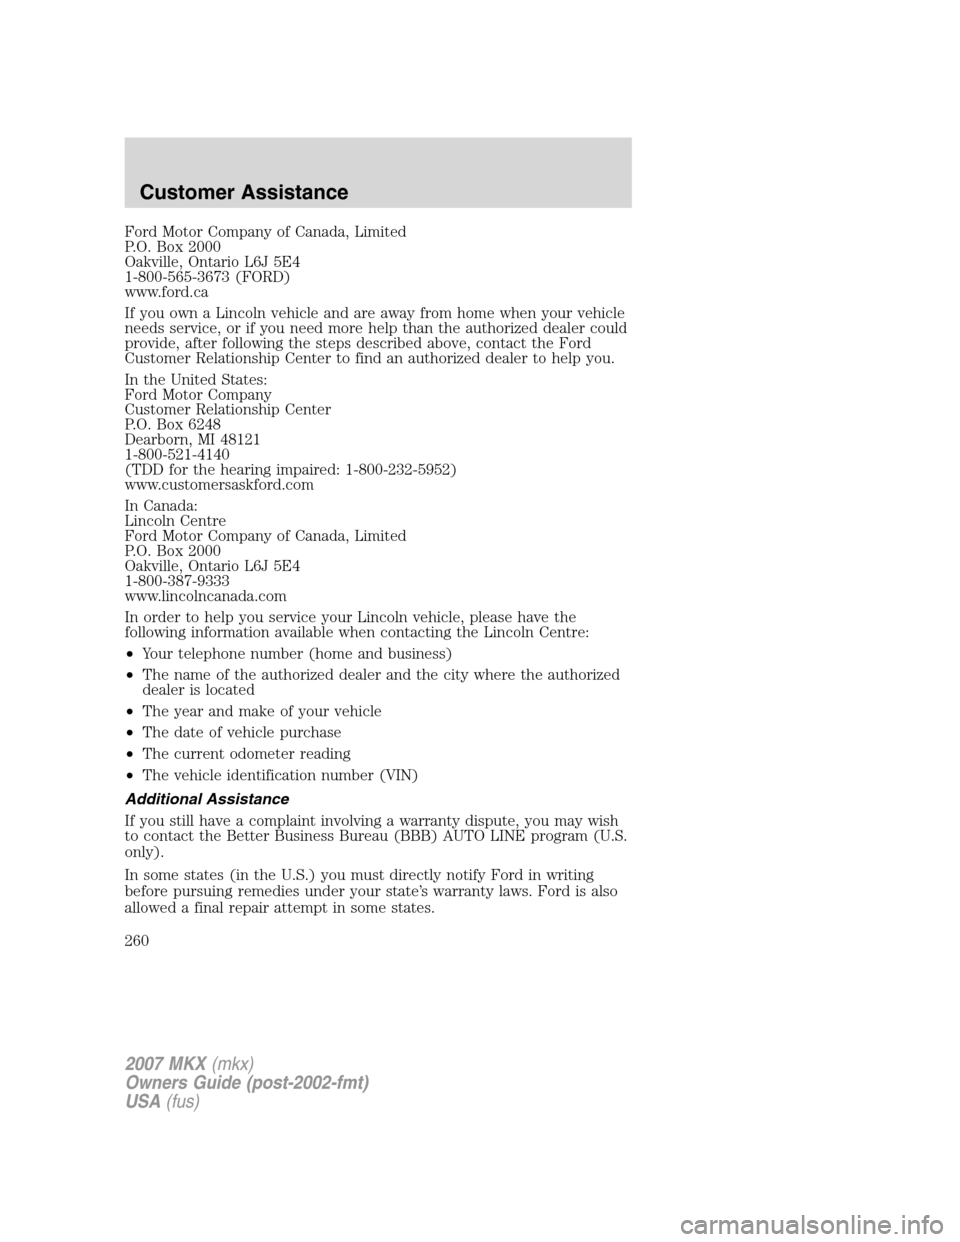 LINCOLN MKX 2007  Owners Manual Ford Motor Company of Canada, Limited
P.O. Box 2000
Oakville, Ontario L6J 5E4
1-800-565-3673 (FORD)
www.ford.ca
If you own a Lincoln vehicle and are away from home when your vehicle
needs service, or 